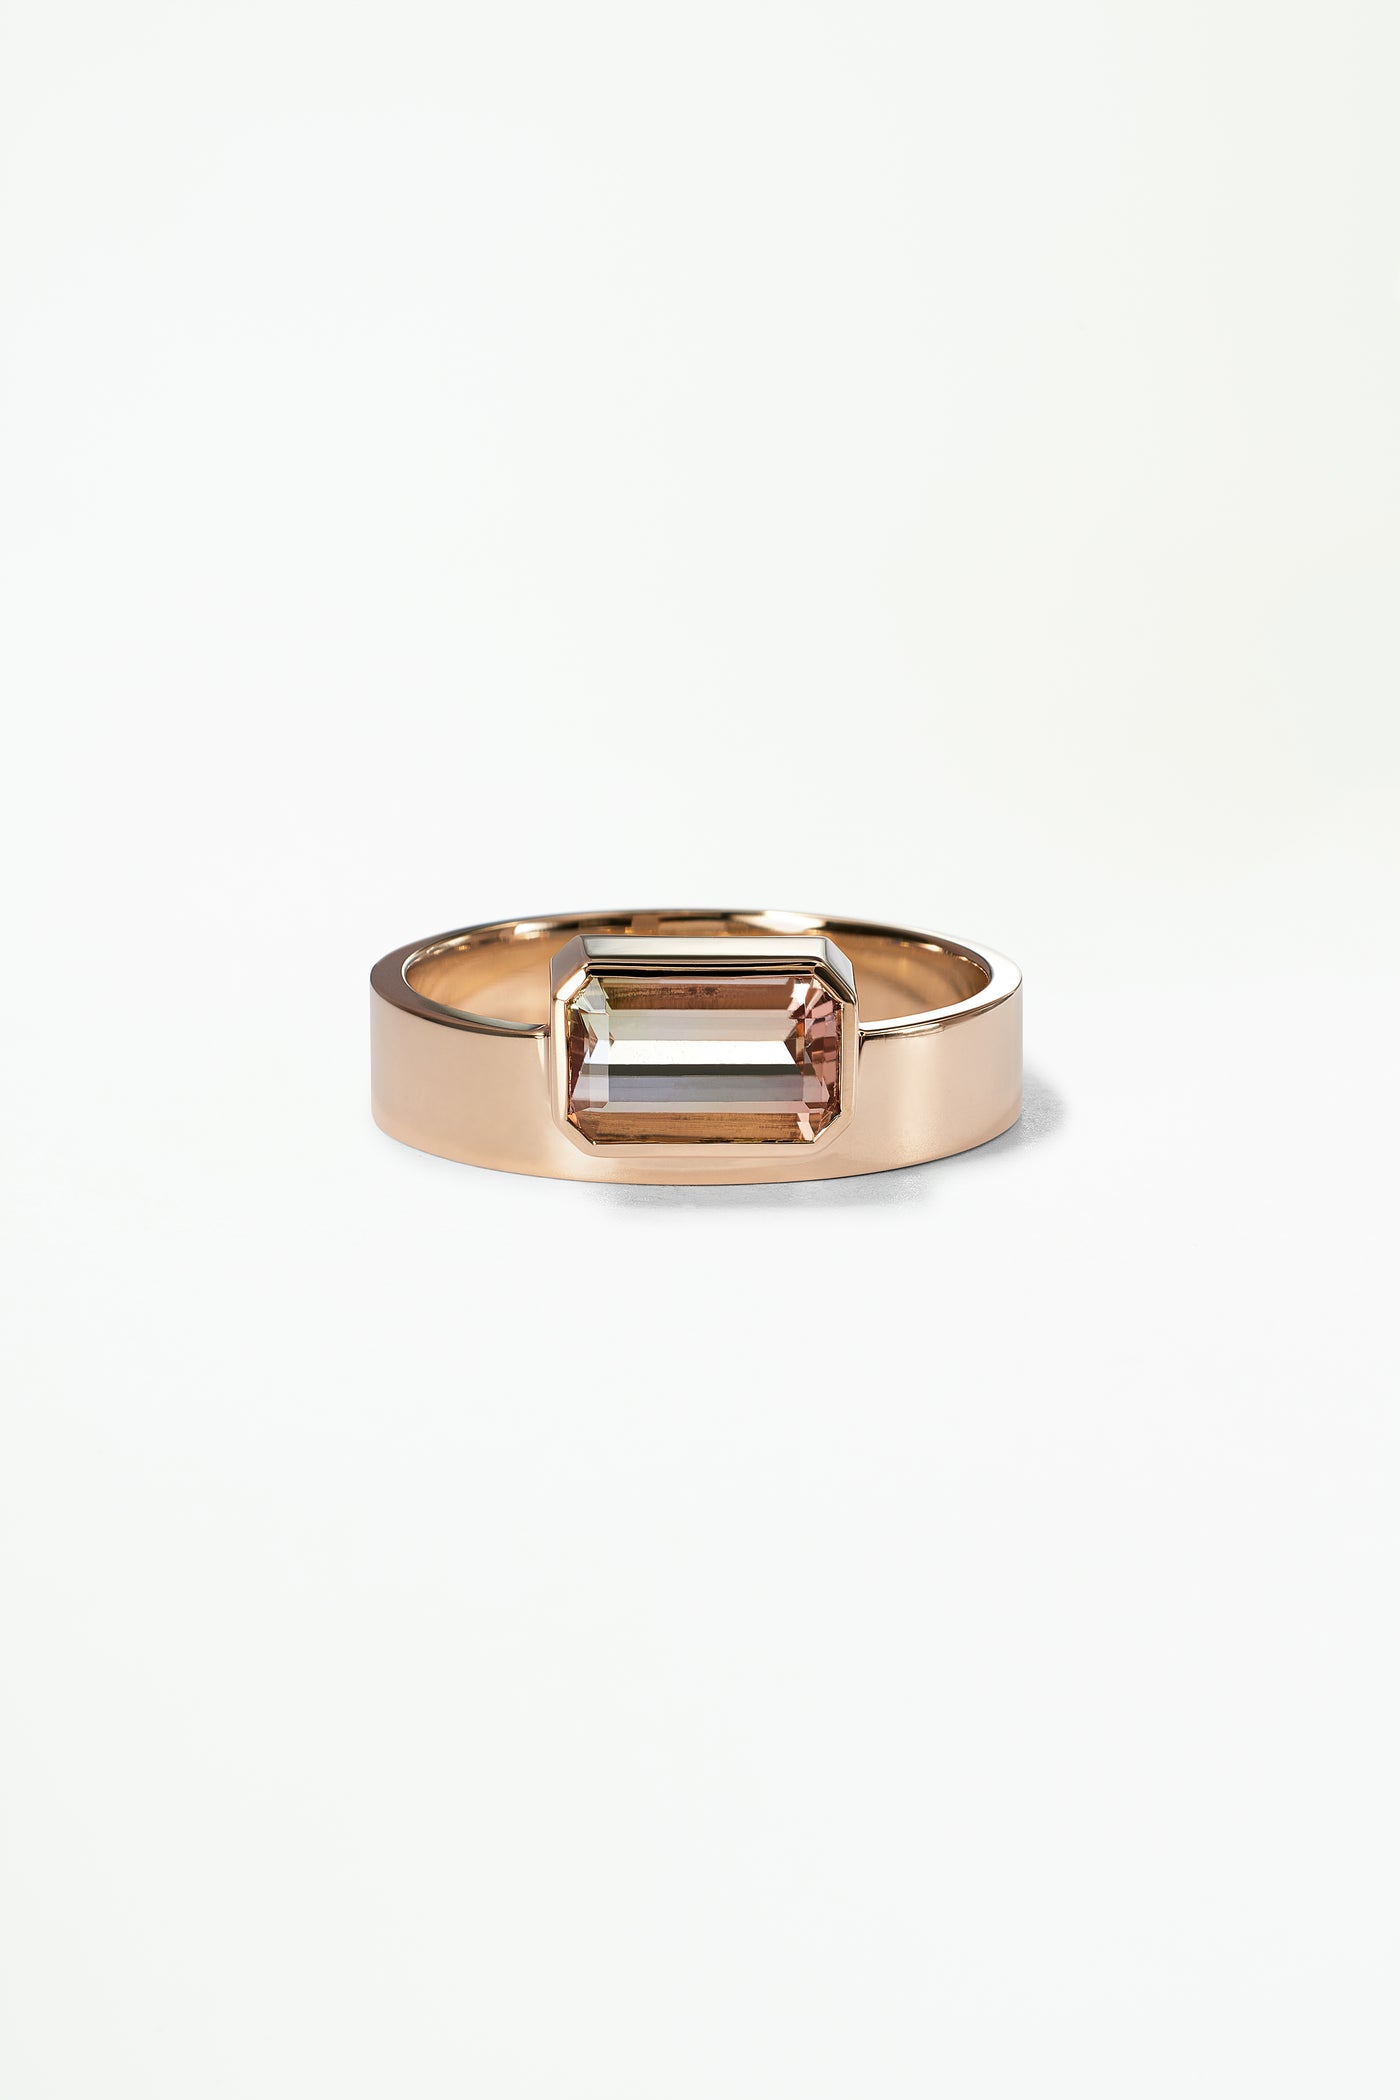 One of a Kind Emerald Cut Tourmaline Monolith Ring No. 1